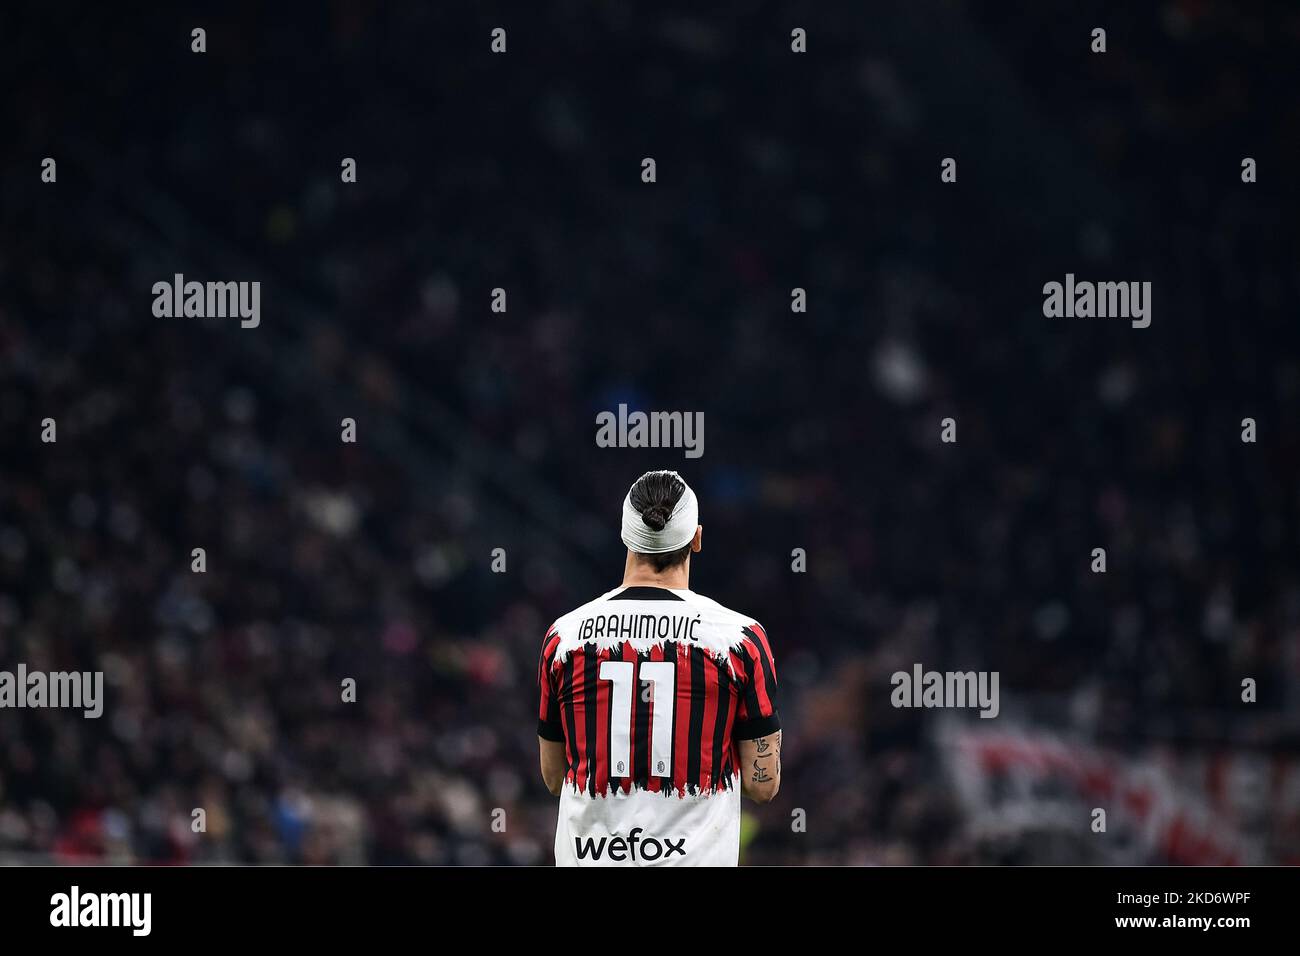 Zlatan Ibrahimovic of A.C. Milan during the Italian Serie A soccer match between A.C. Milan vs Bologna F.C. at the San Siro Stadium in Milan, Italy on 4 April 2022. (Photo by Michele Maraviglia/NurPhoto) Stock Photo